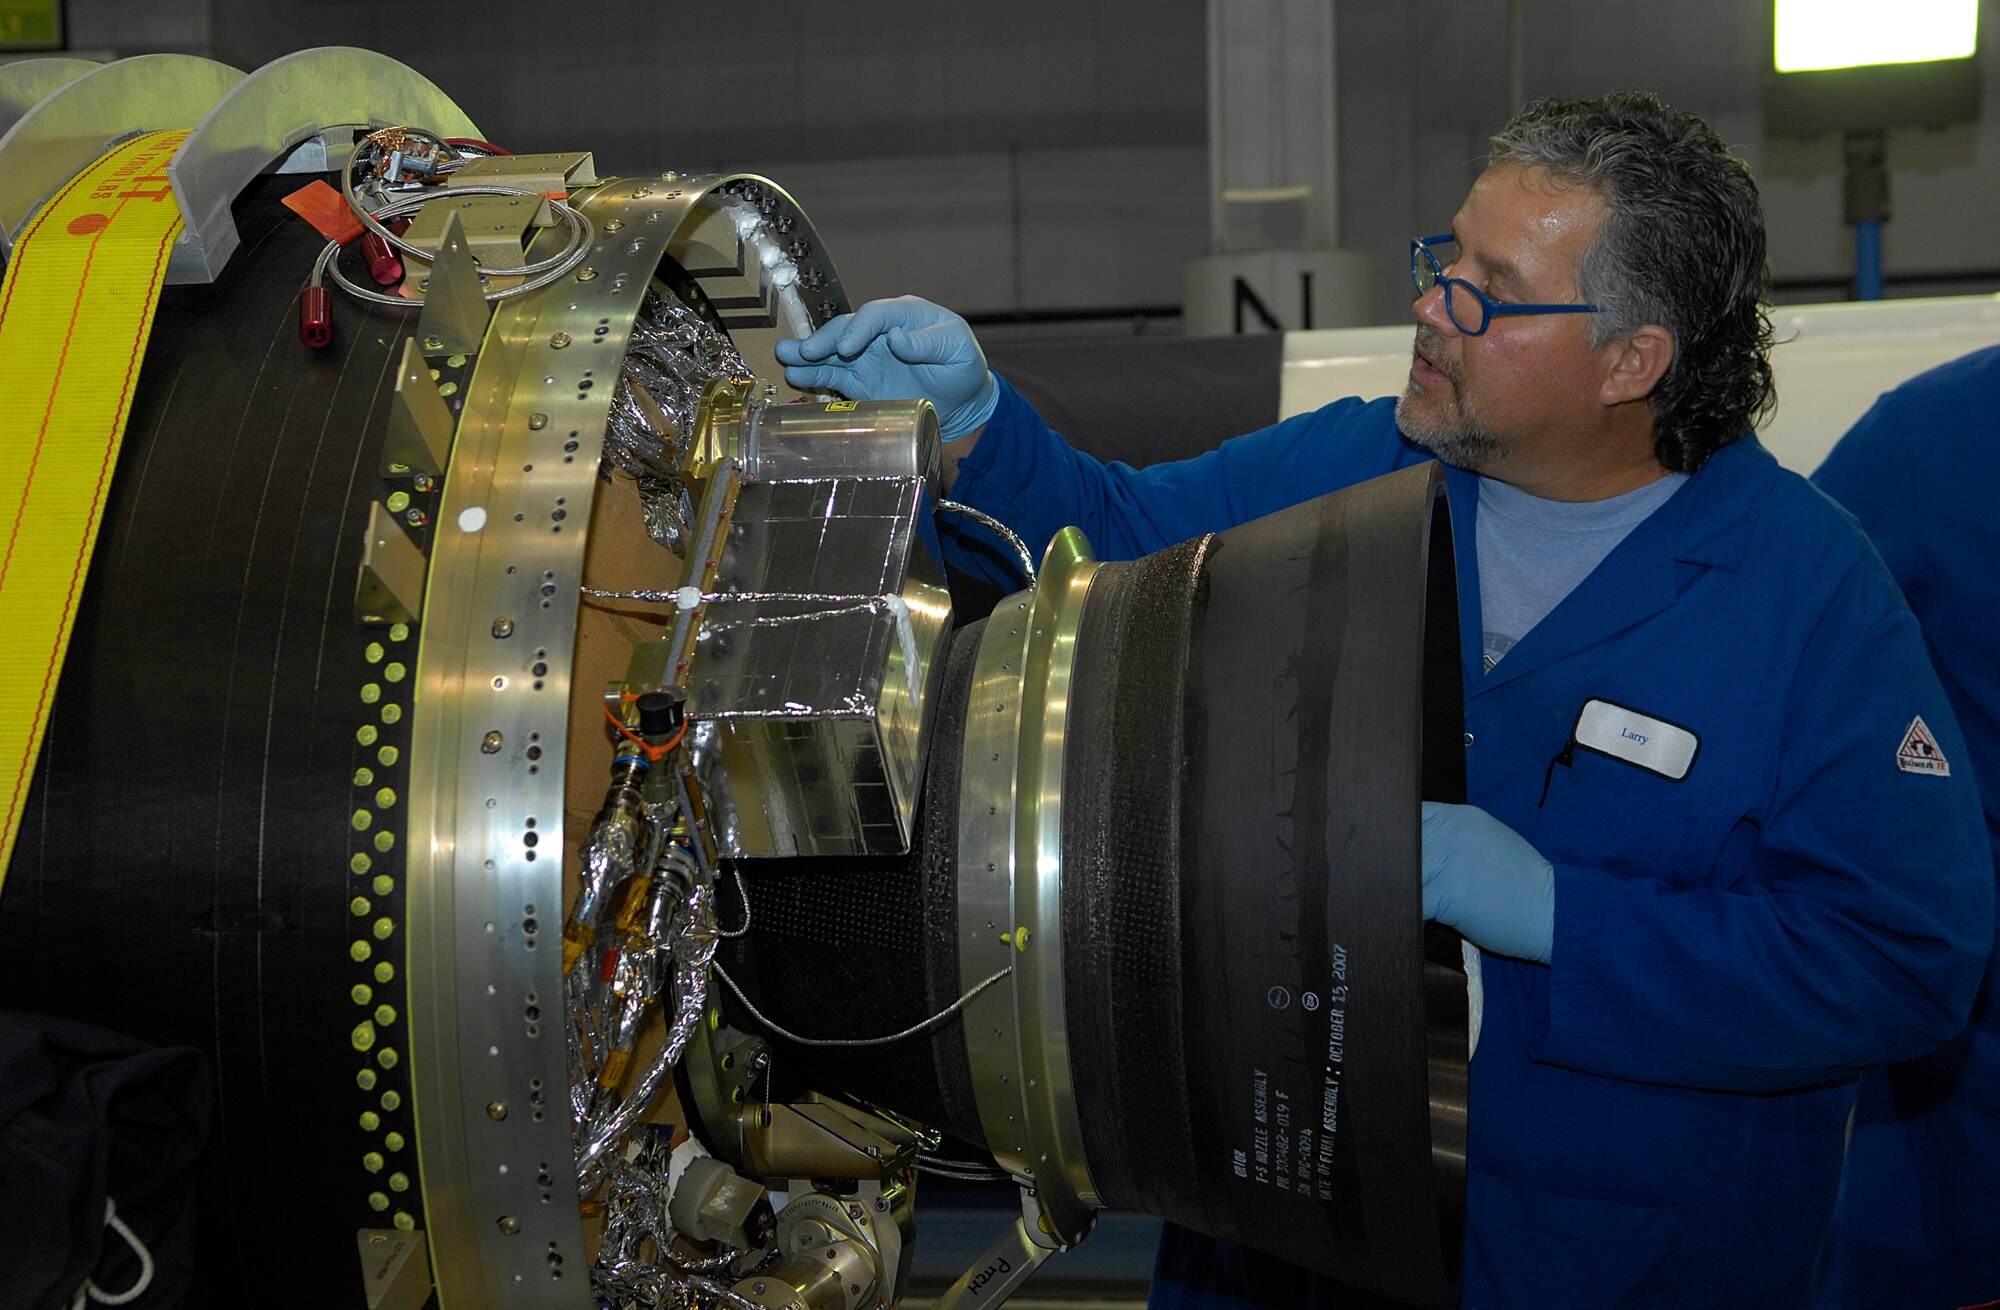 VANDENBERG AIR FORCE BASE, Calif. --  Larry Phipps, an Orbital Science Corporations employee, works on the Stage 3 piece of a motor for a Flight Test Missile 6 at the Orbital Missile Assembly Building on Oct. 28. (U.S. Air Force photo / Airman 1st Class Andrew Lee)